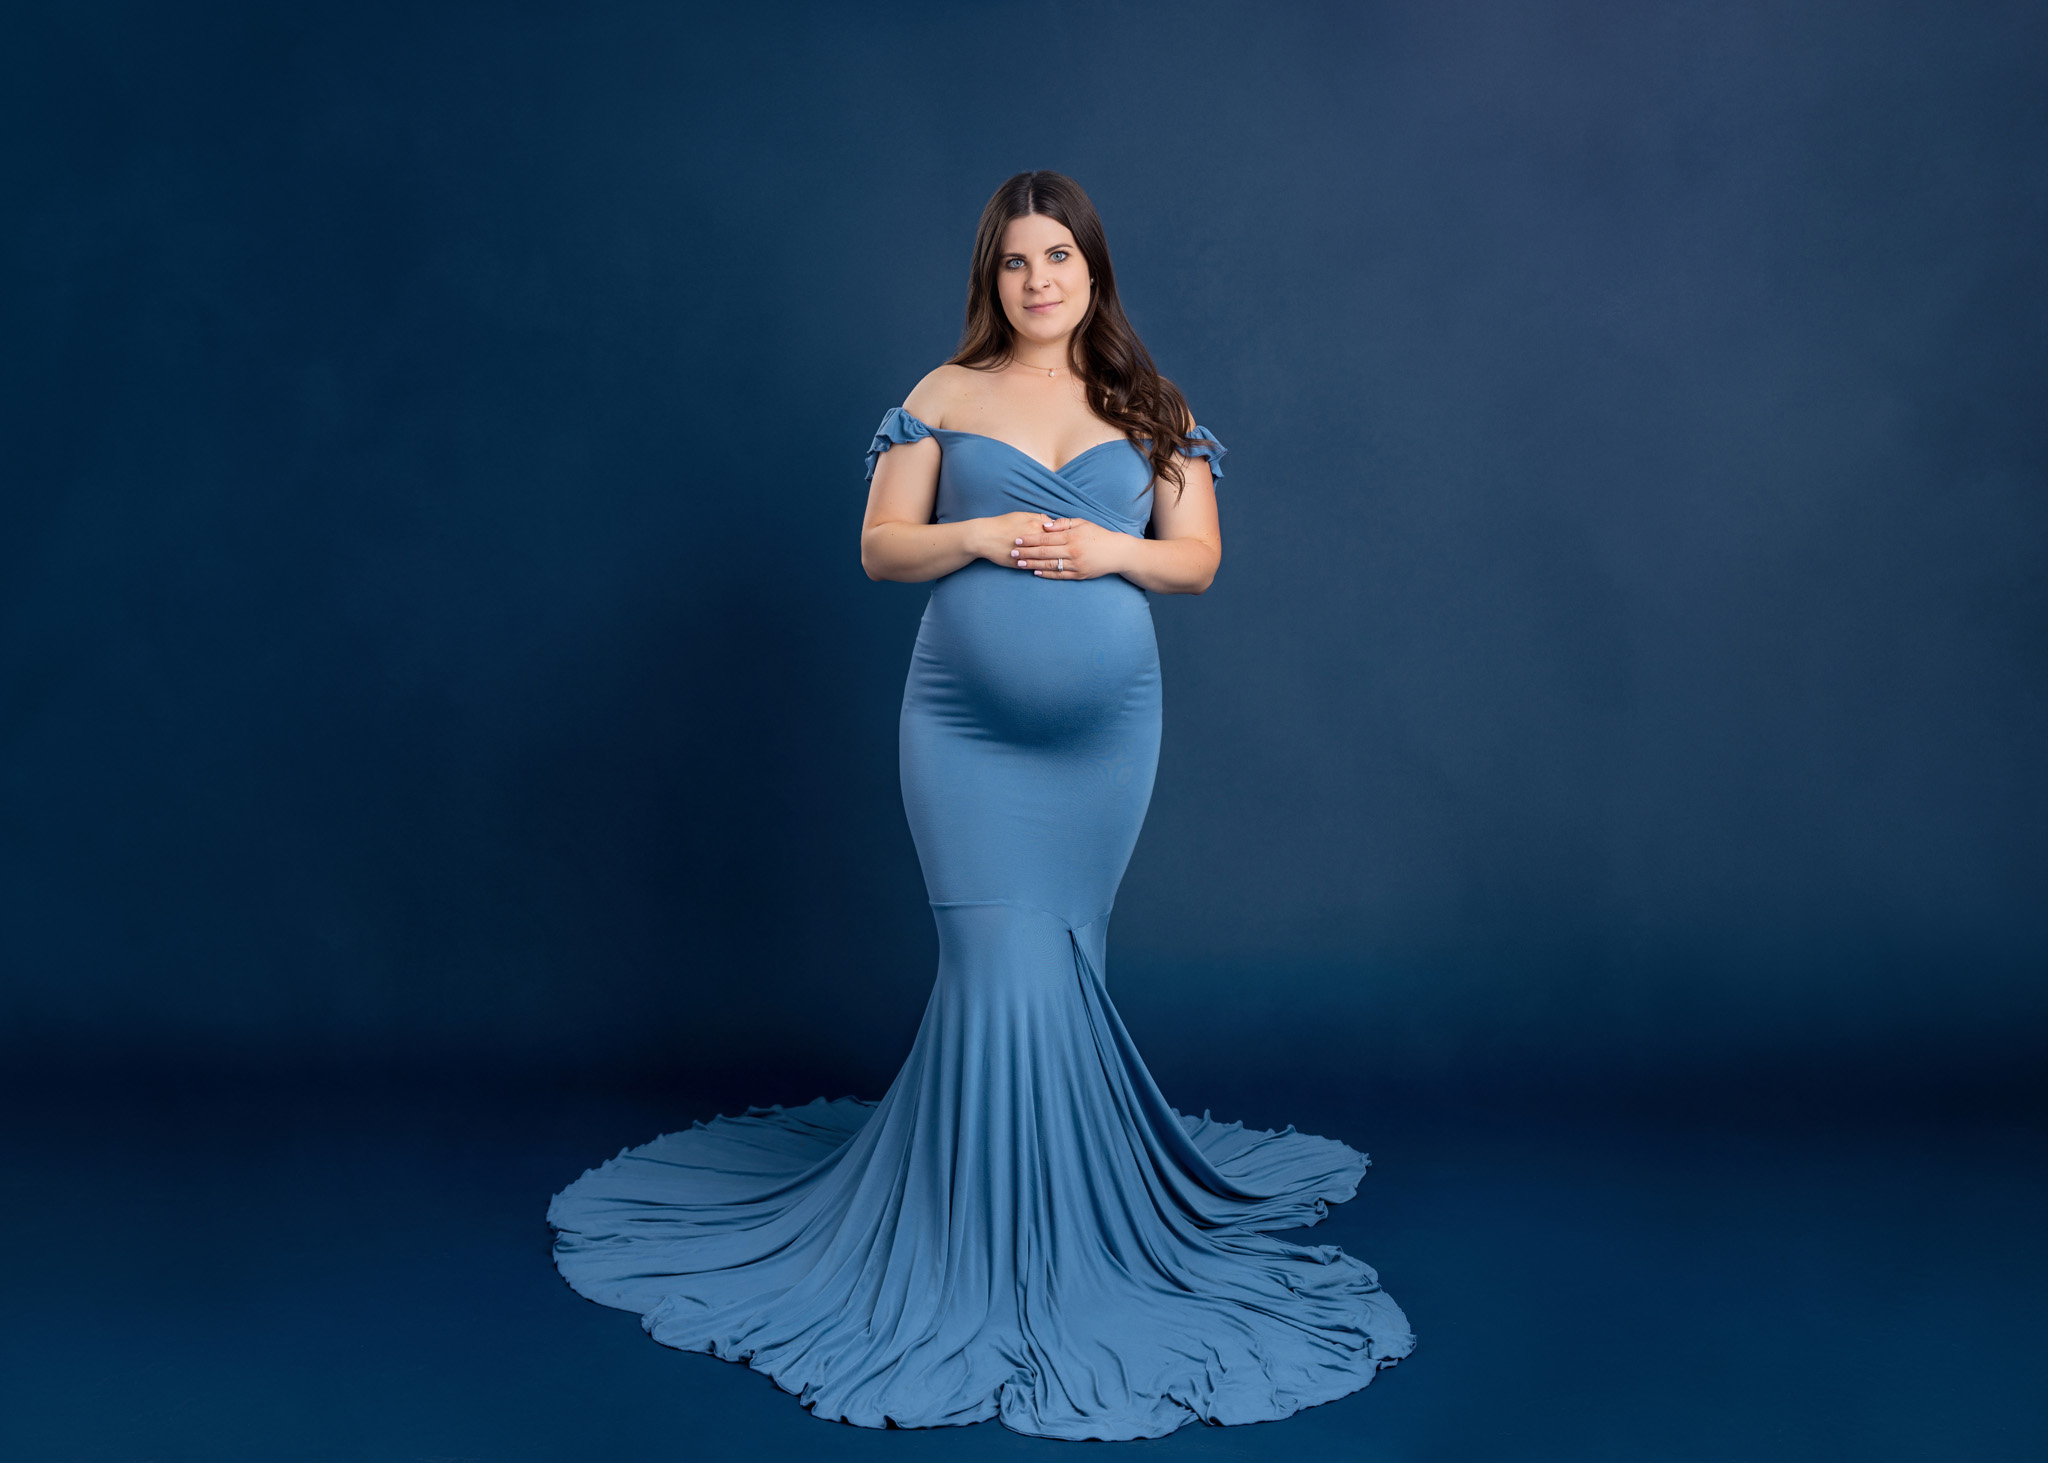 pregnant women in light blue off the shoulder dress standing in front of a cblue backdrop holding her pregnant belly gently gazing at the camera